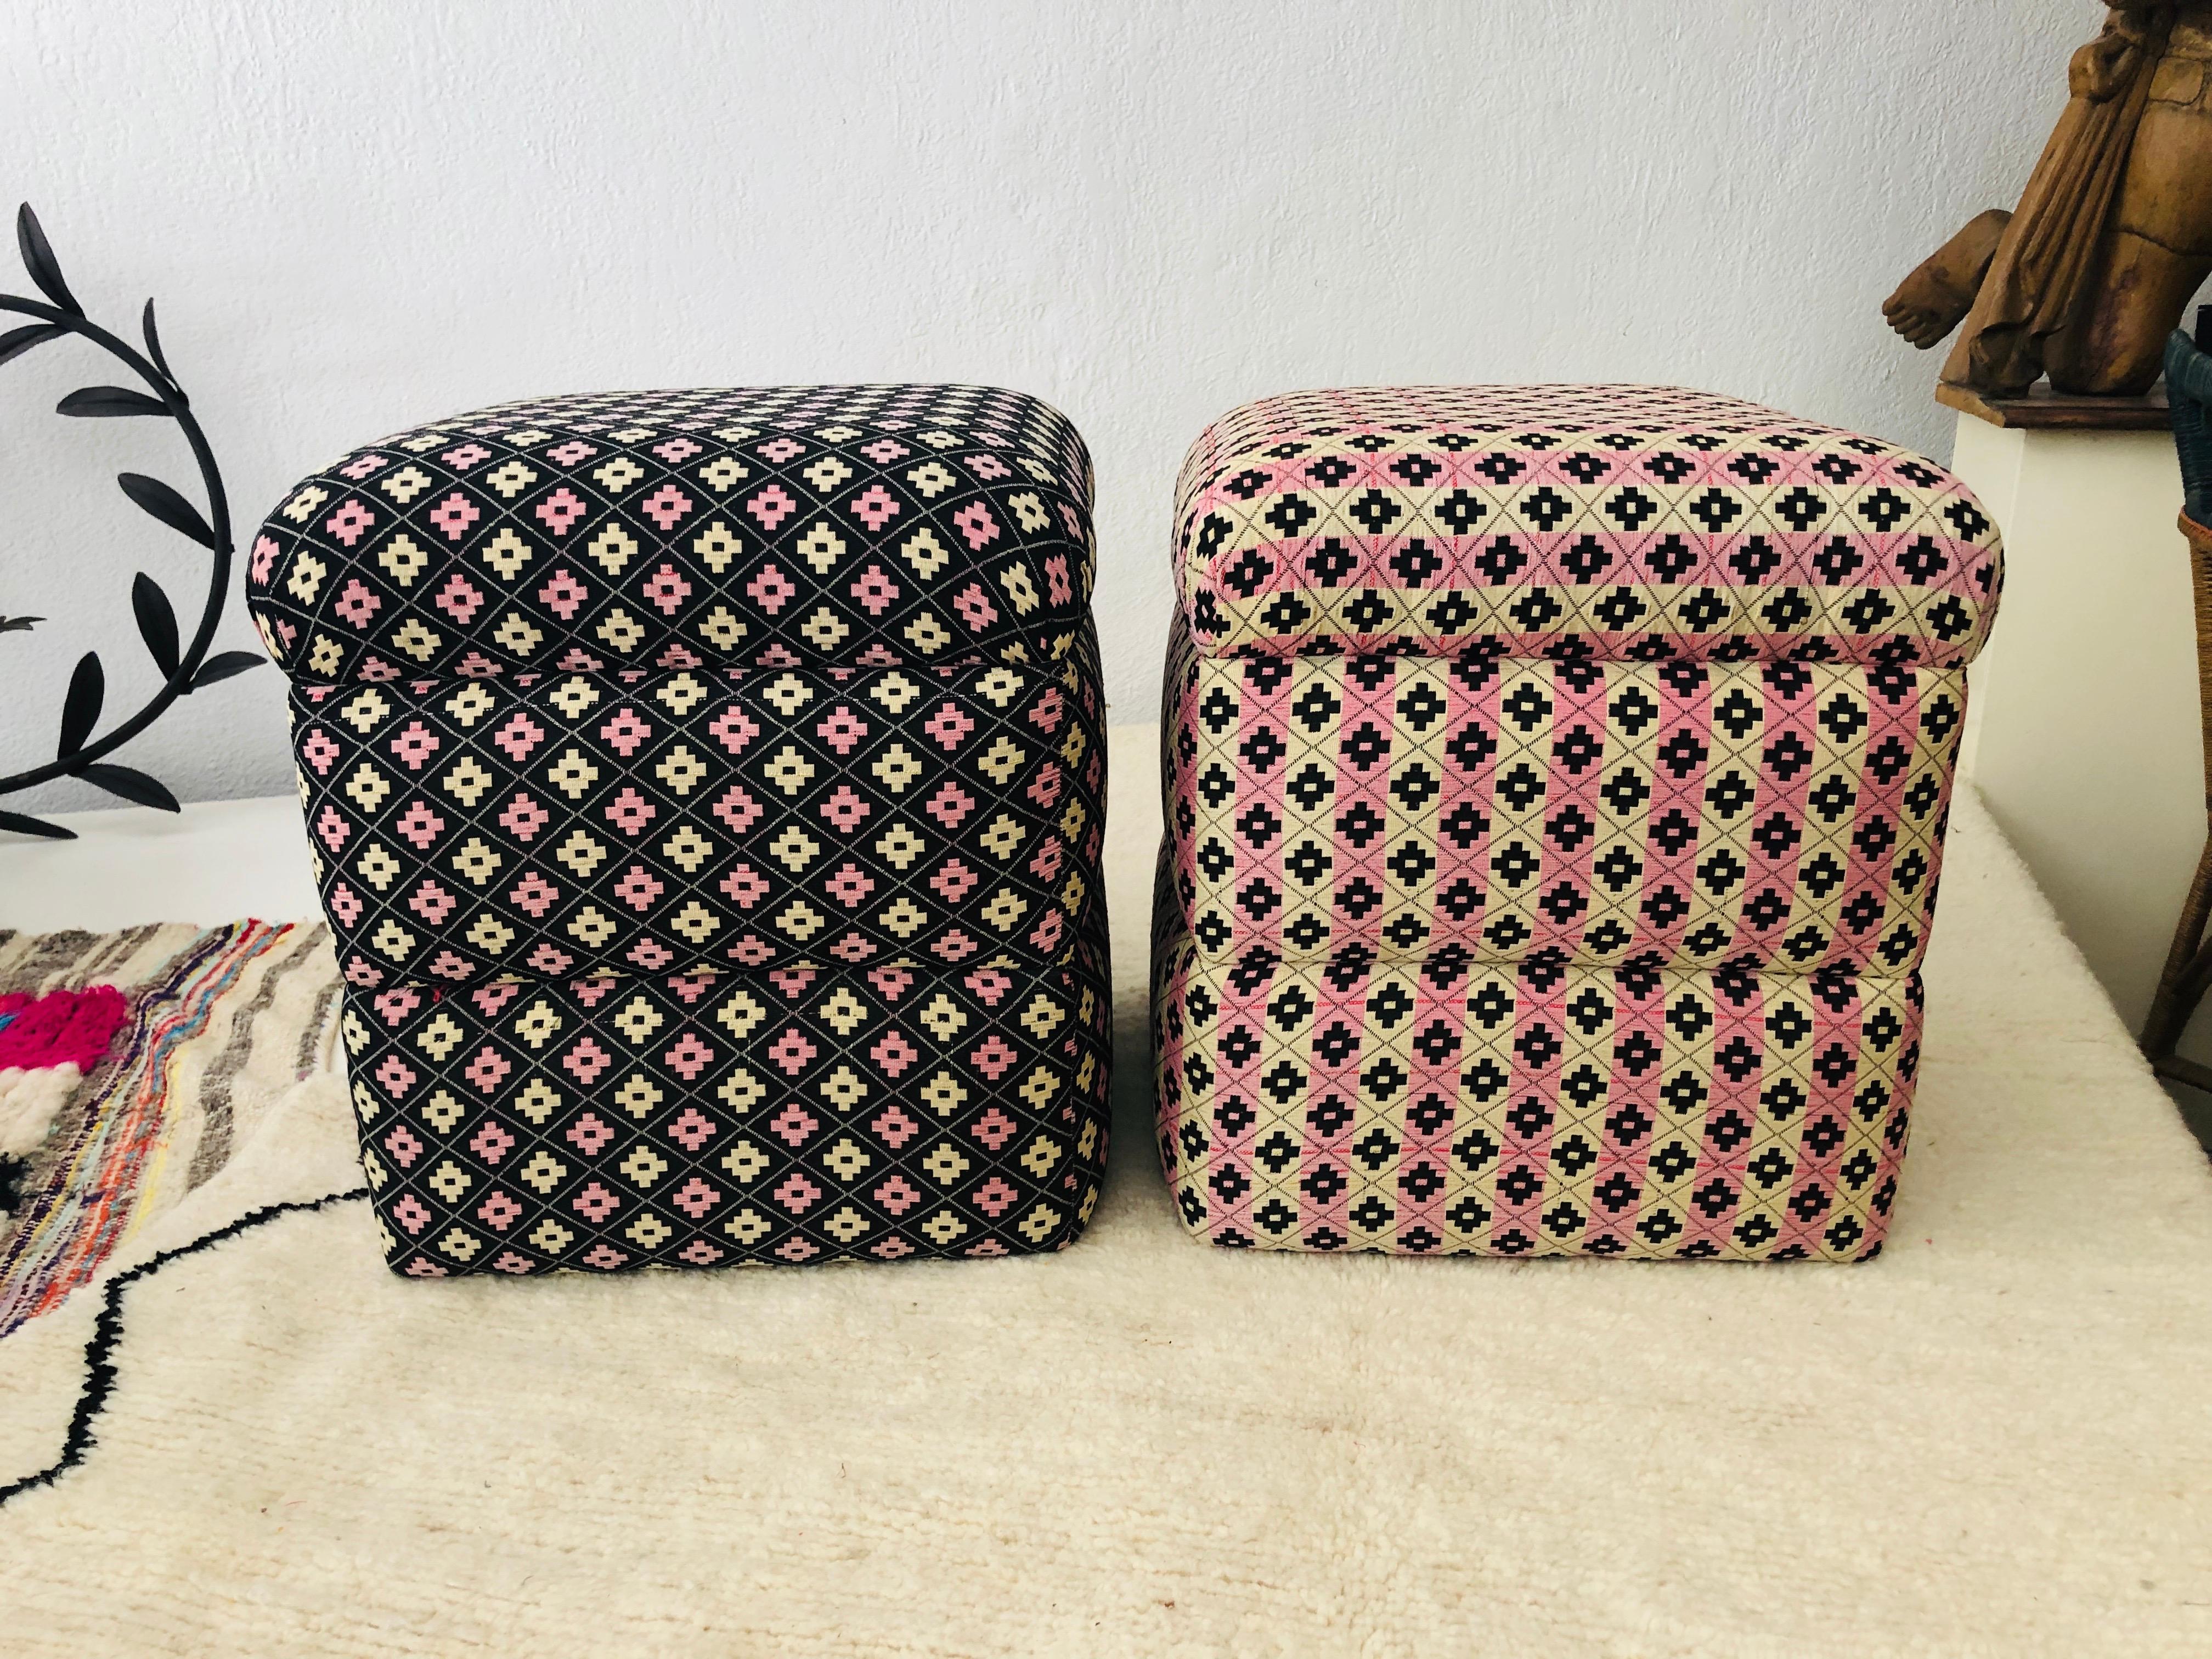 Art Deco cube ottomans. The compatible pair of ottomans are recently beautifully upholstered and are hand tufted. In addition to featuring beautiful print design in black, pink and beige, the cube shape creates a bold statement in the living